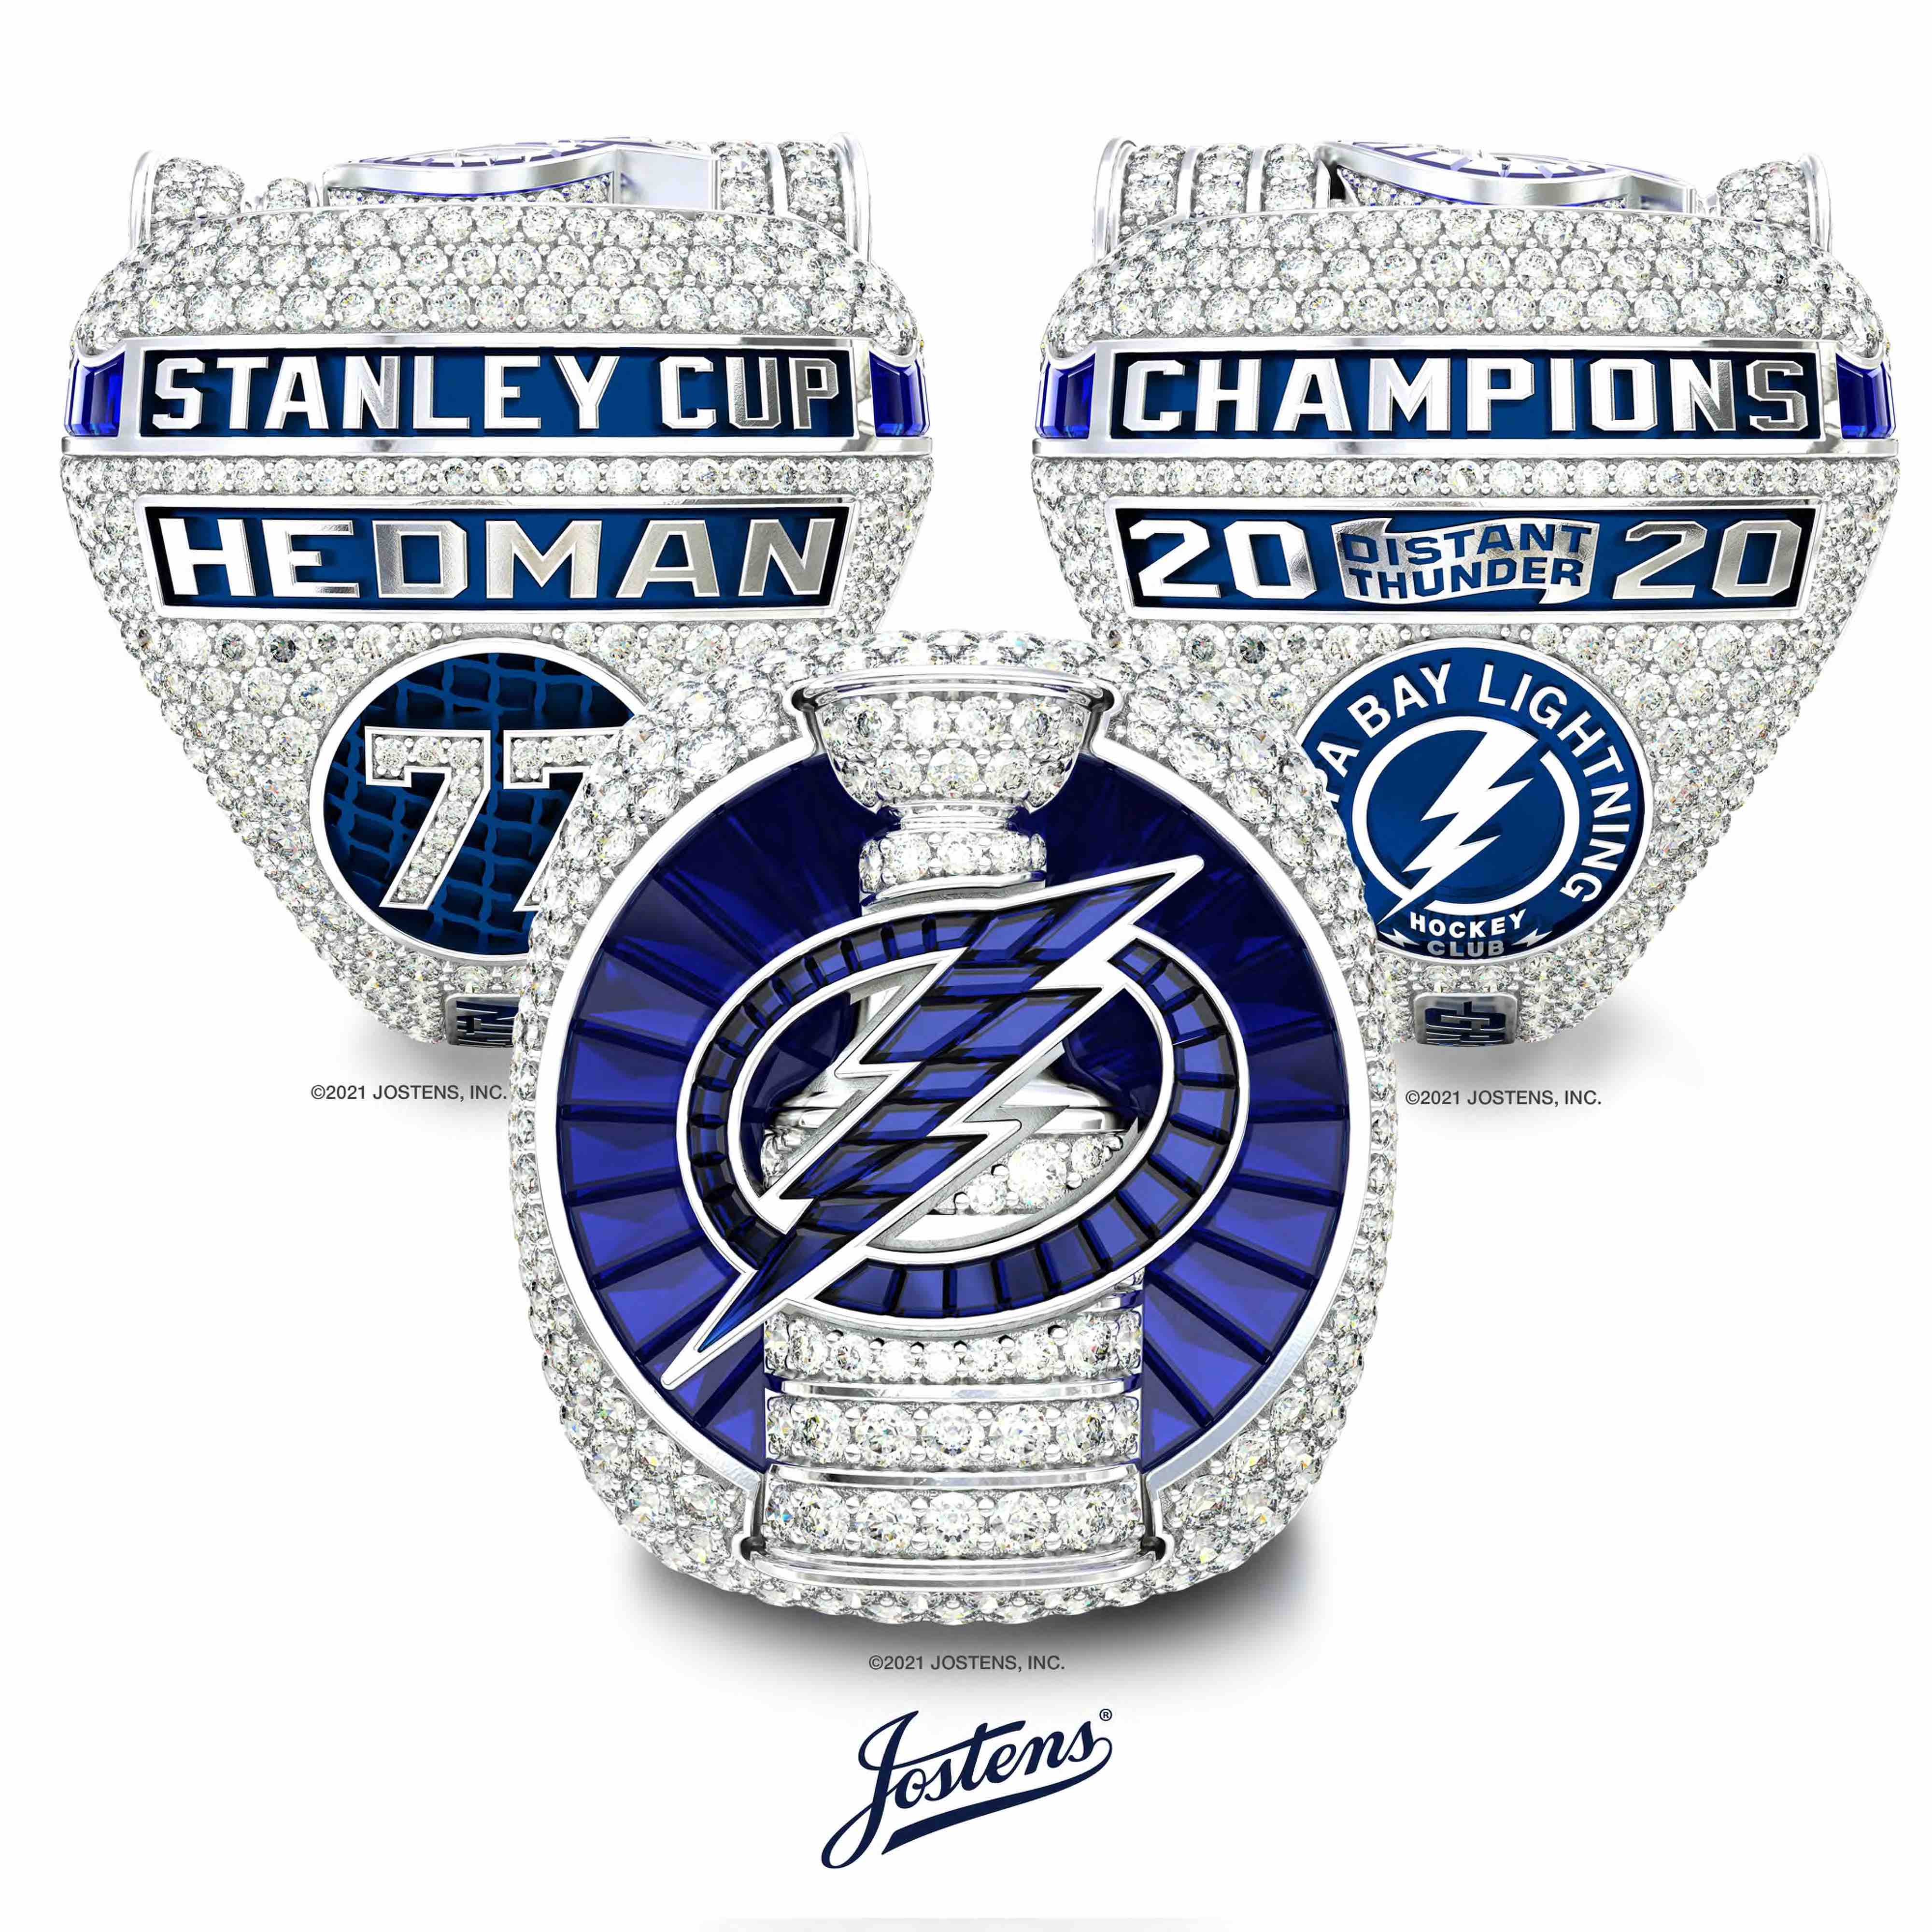 Jostens Creates Stanley Cup Championship Ring For